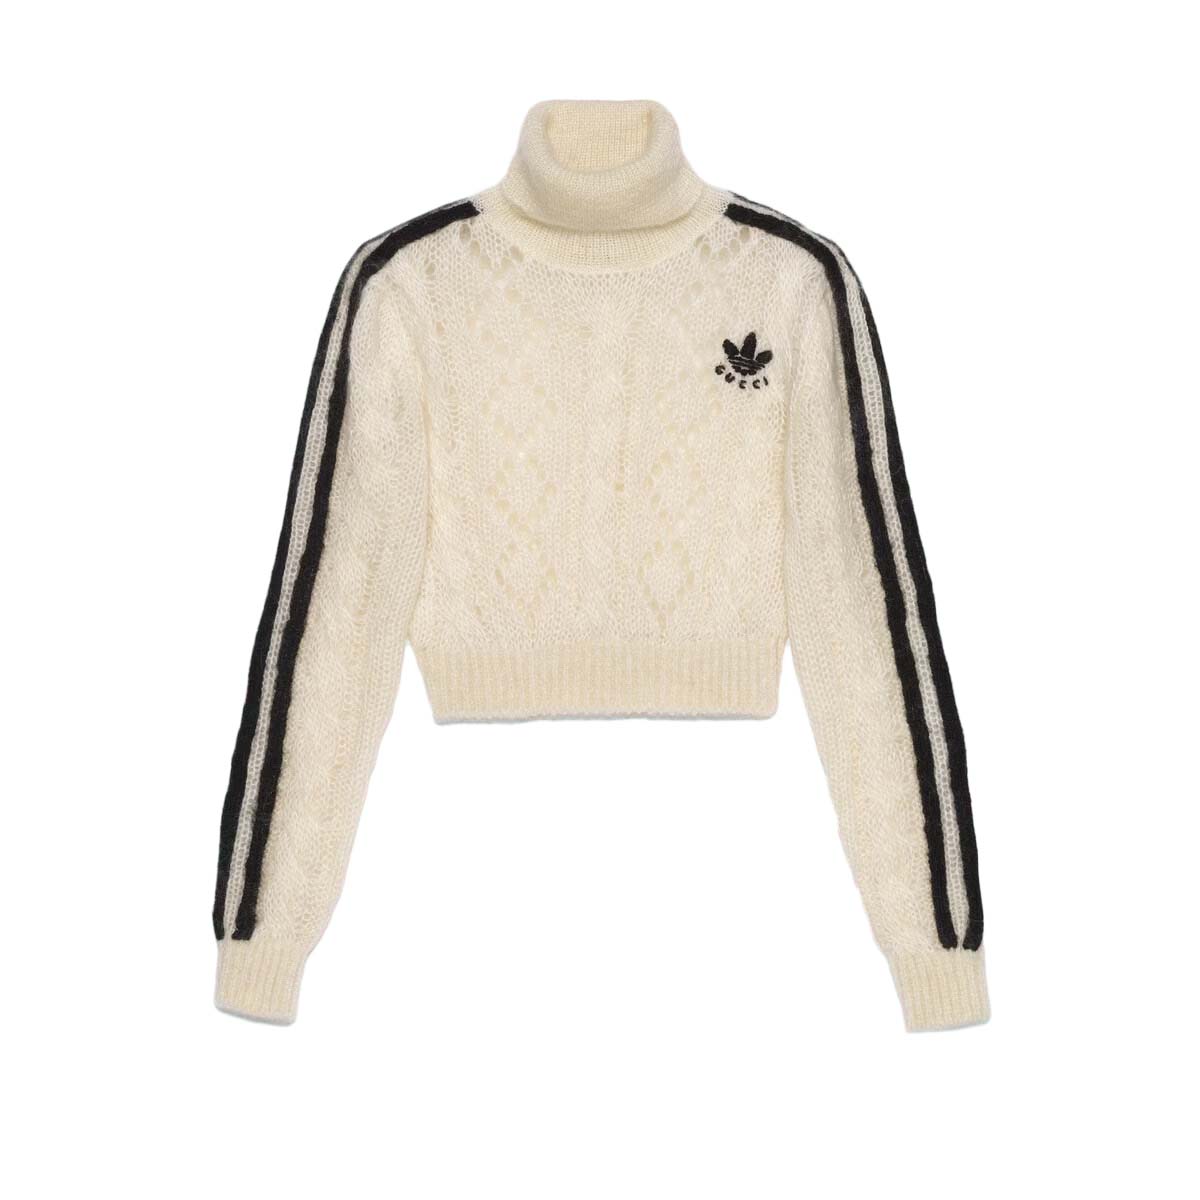 Gucci x adidas Mohair Knit Sweater Ivory